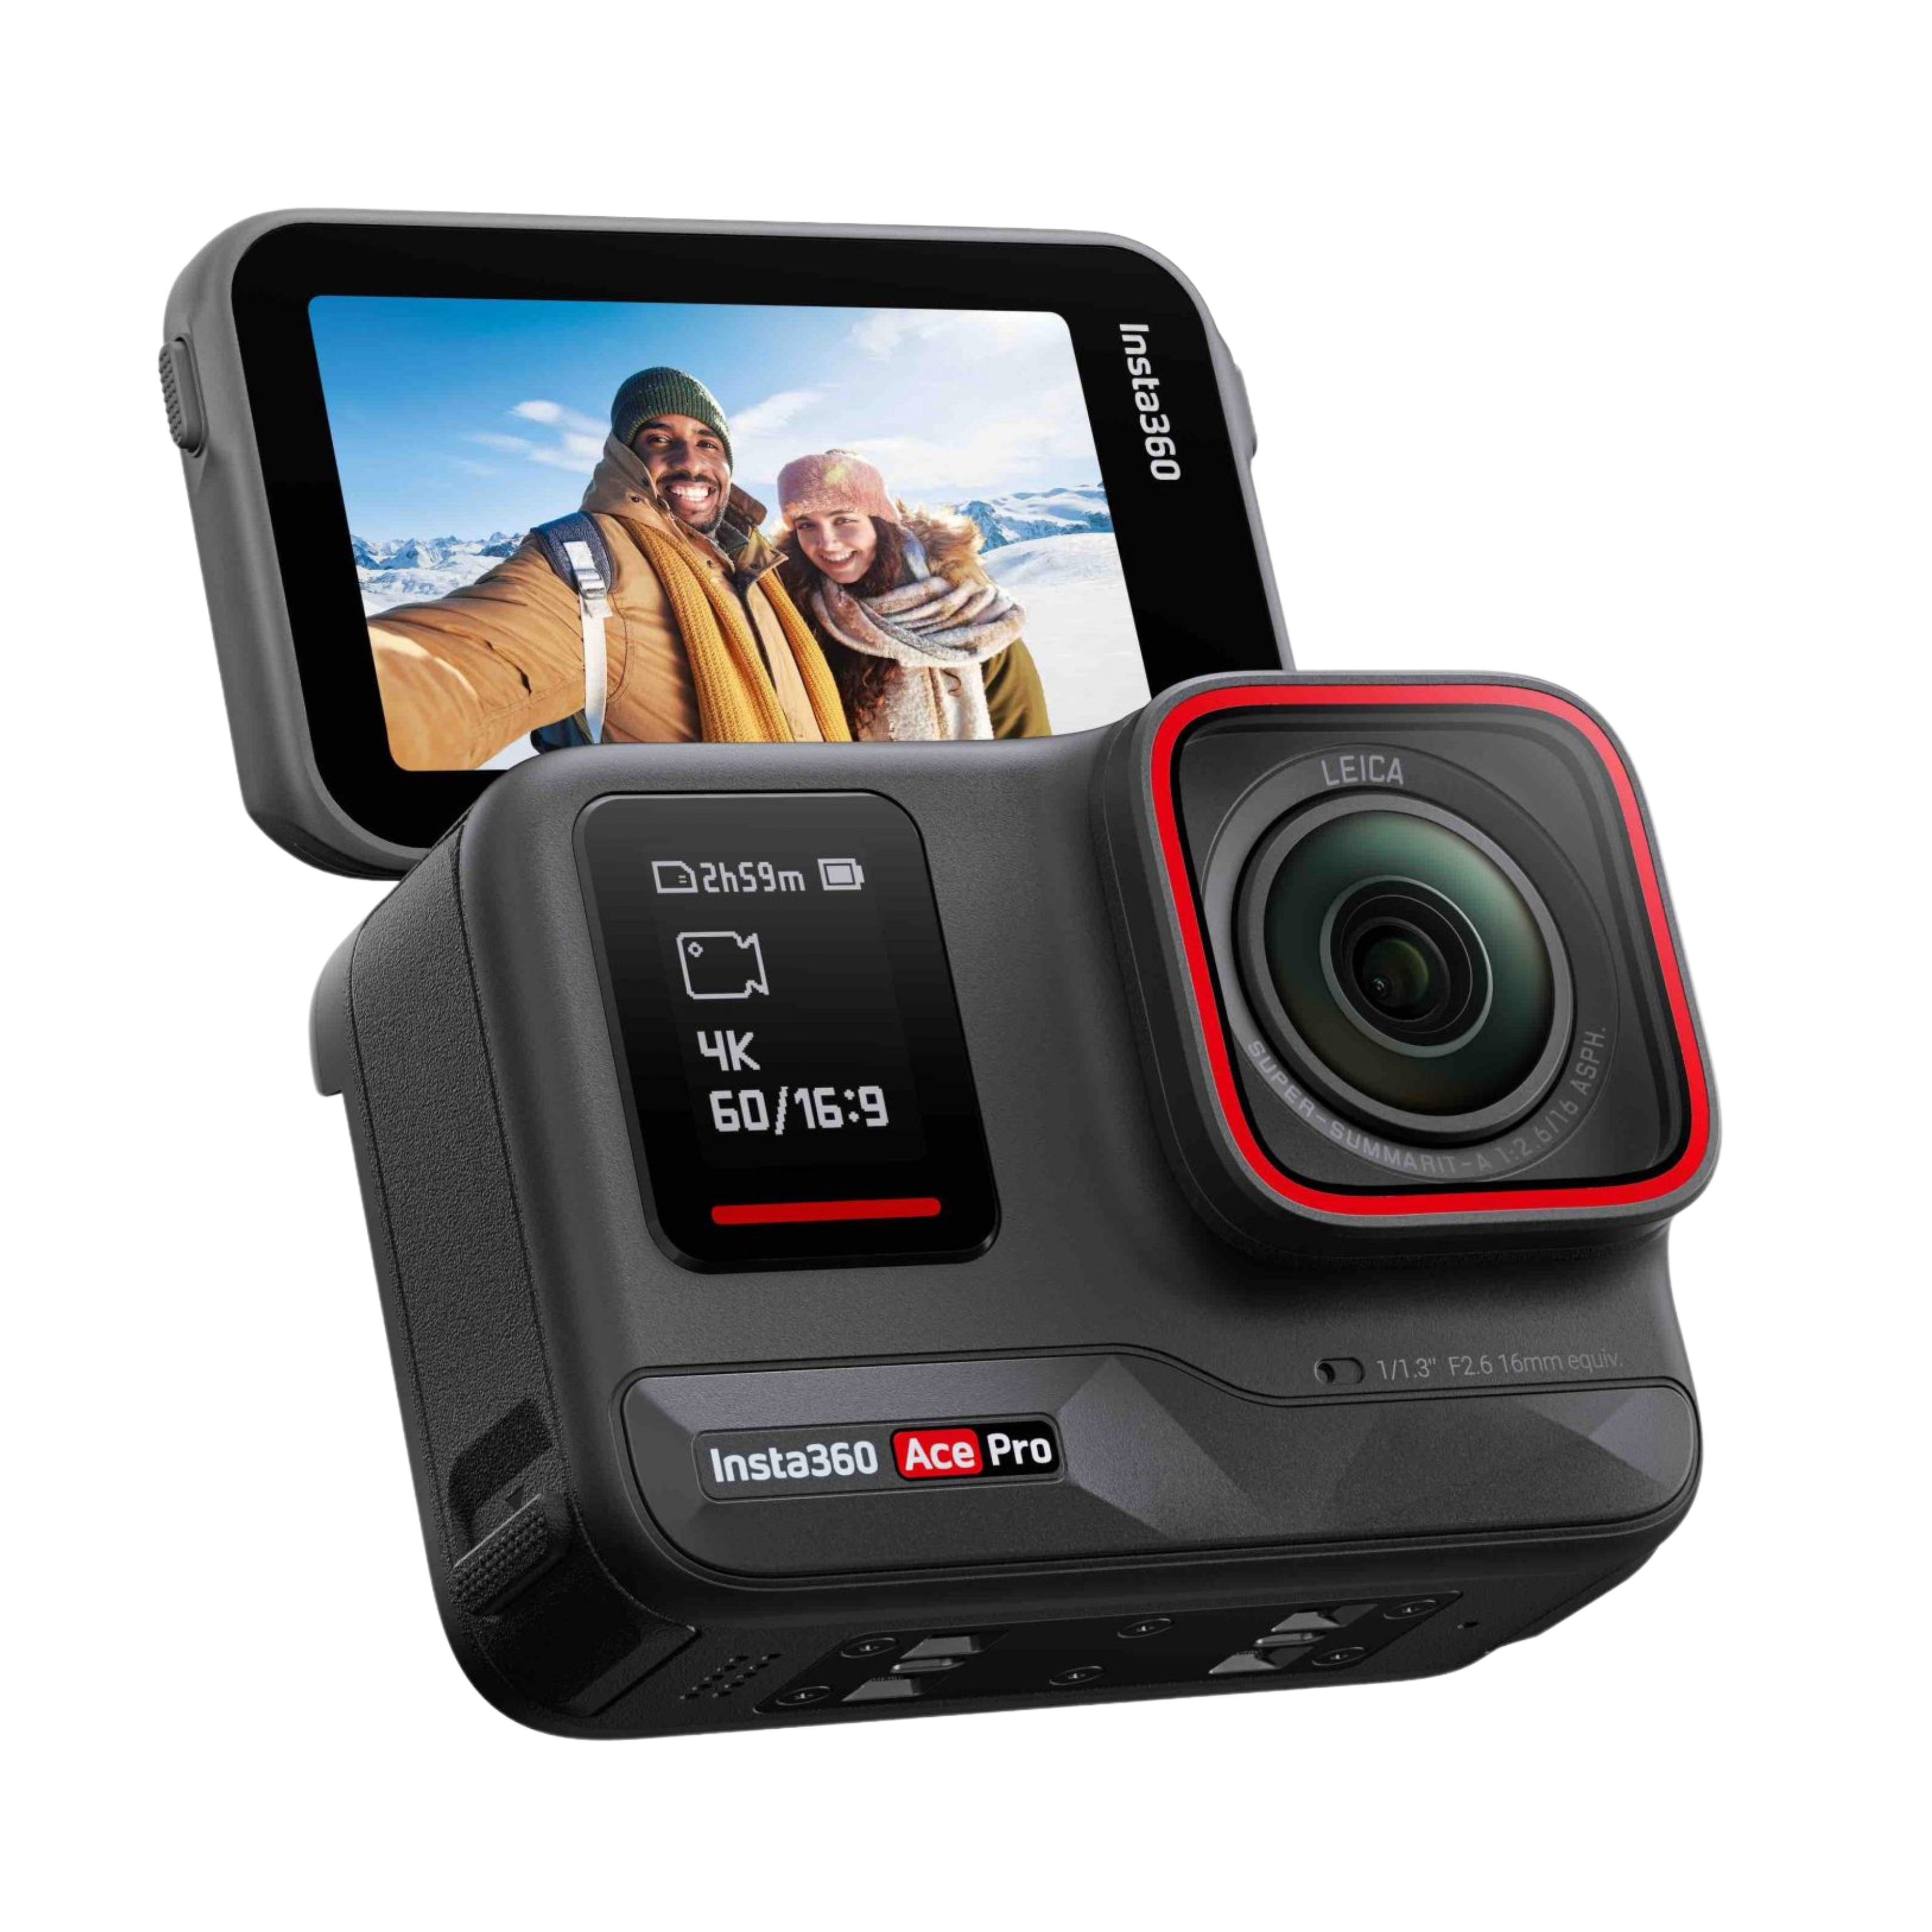 This is an image of Insta360 Ace Pro on rent offered by SharePal.in